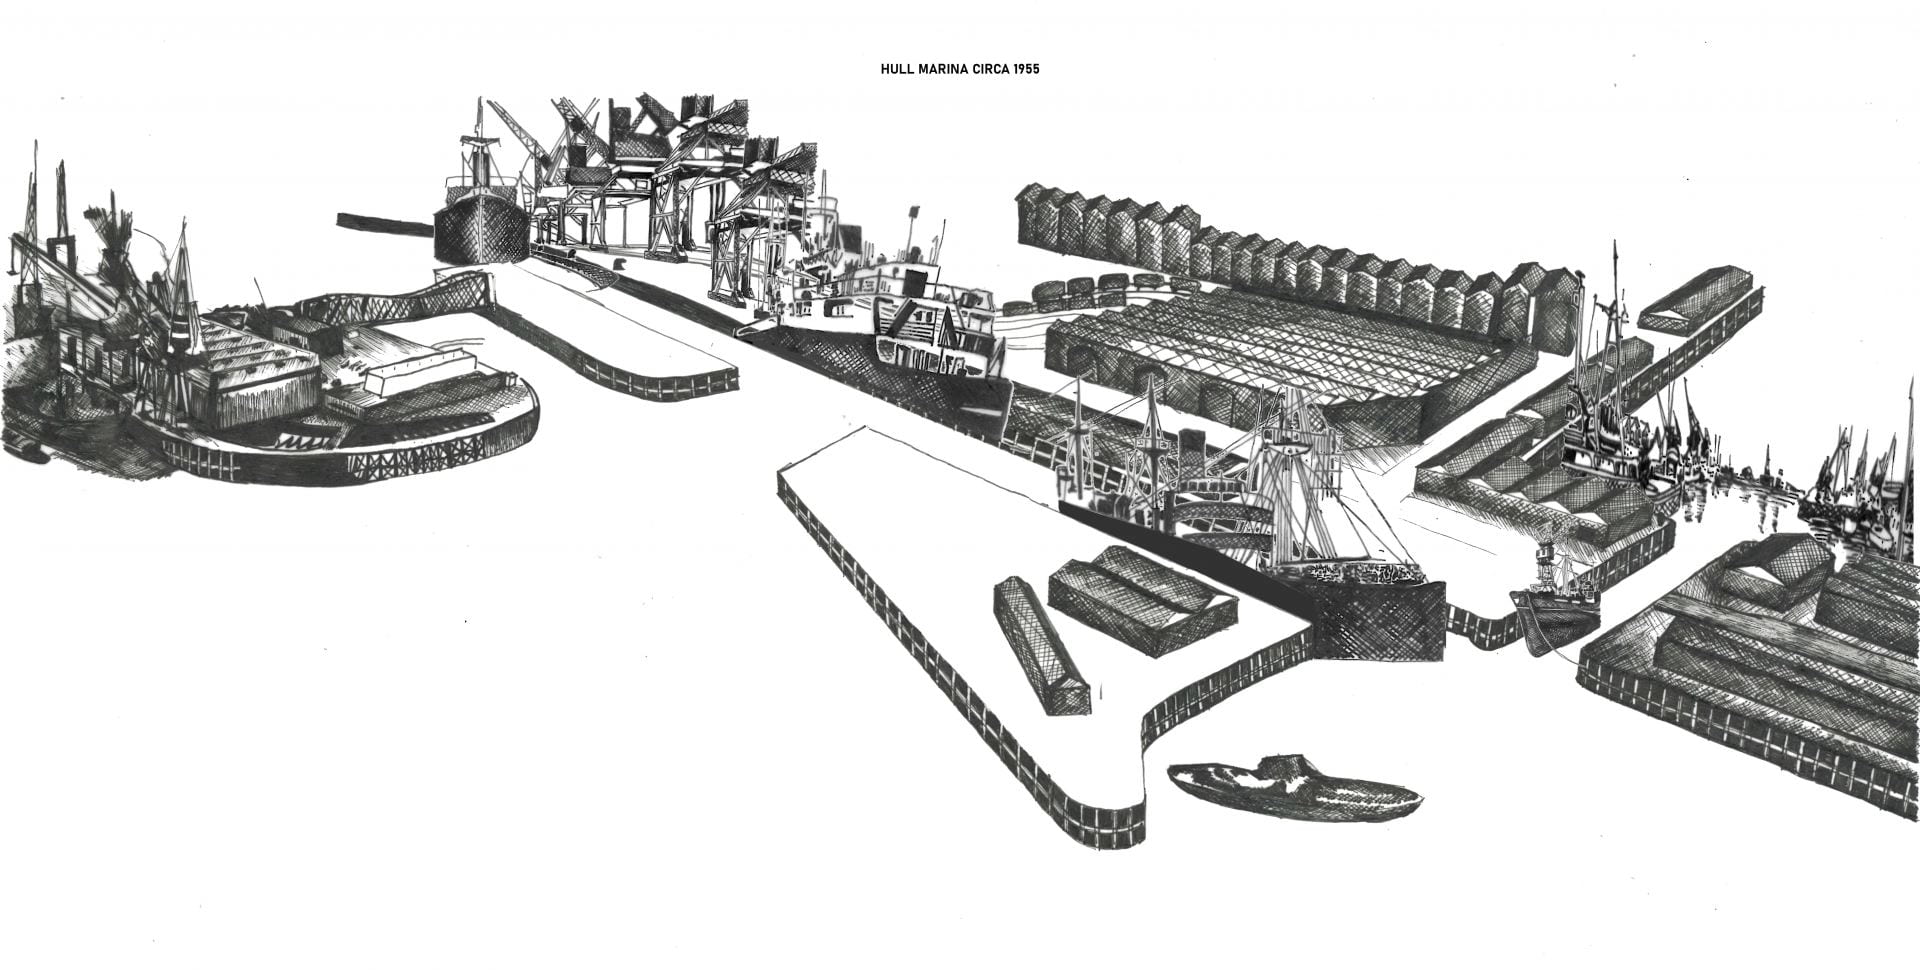 black and white drawing of the Hull Marina in the 1950's